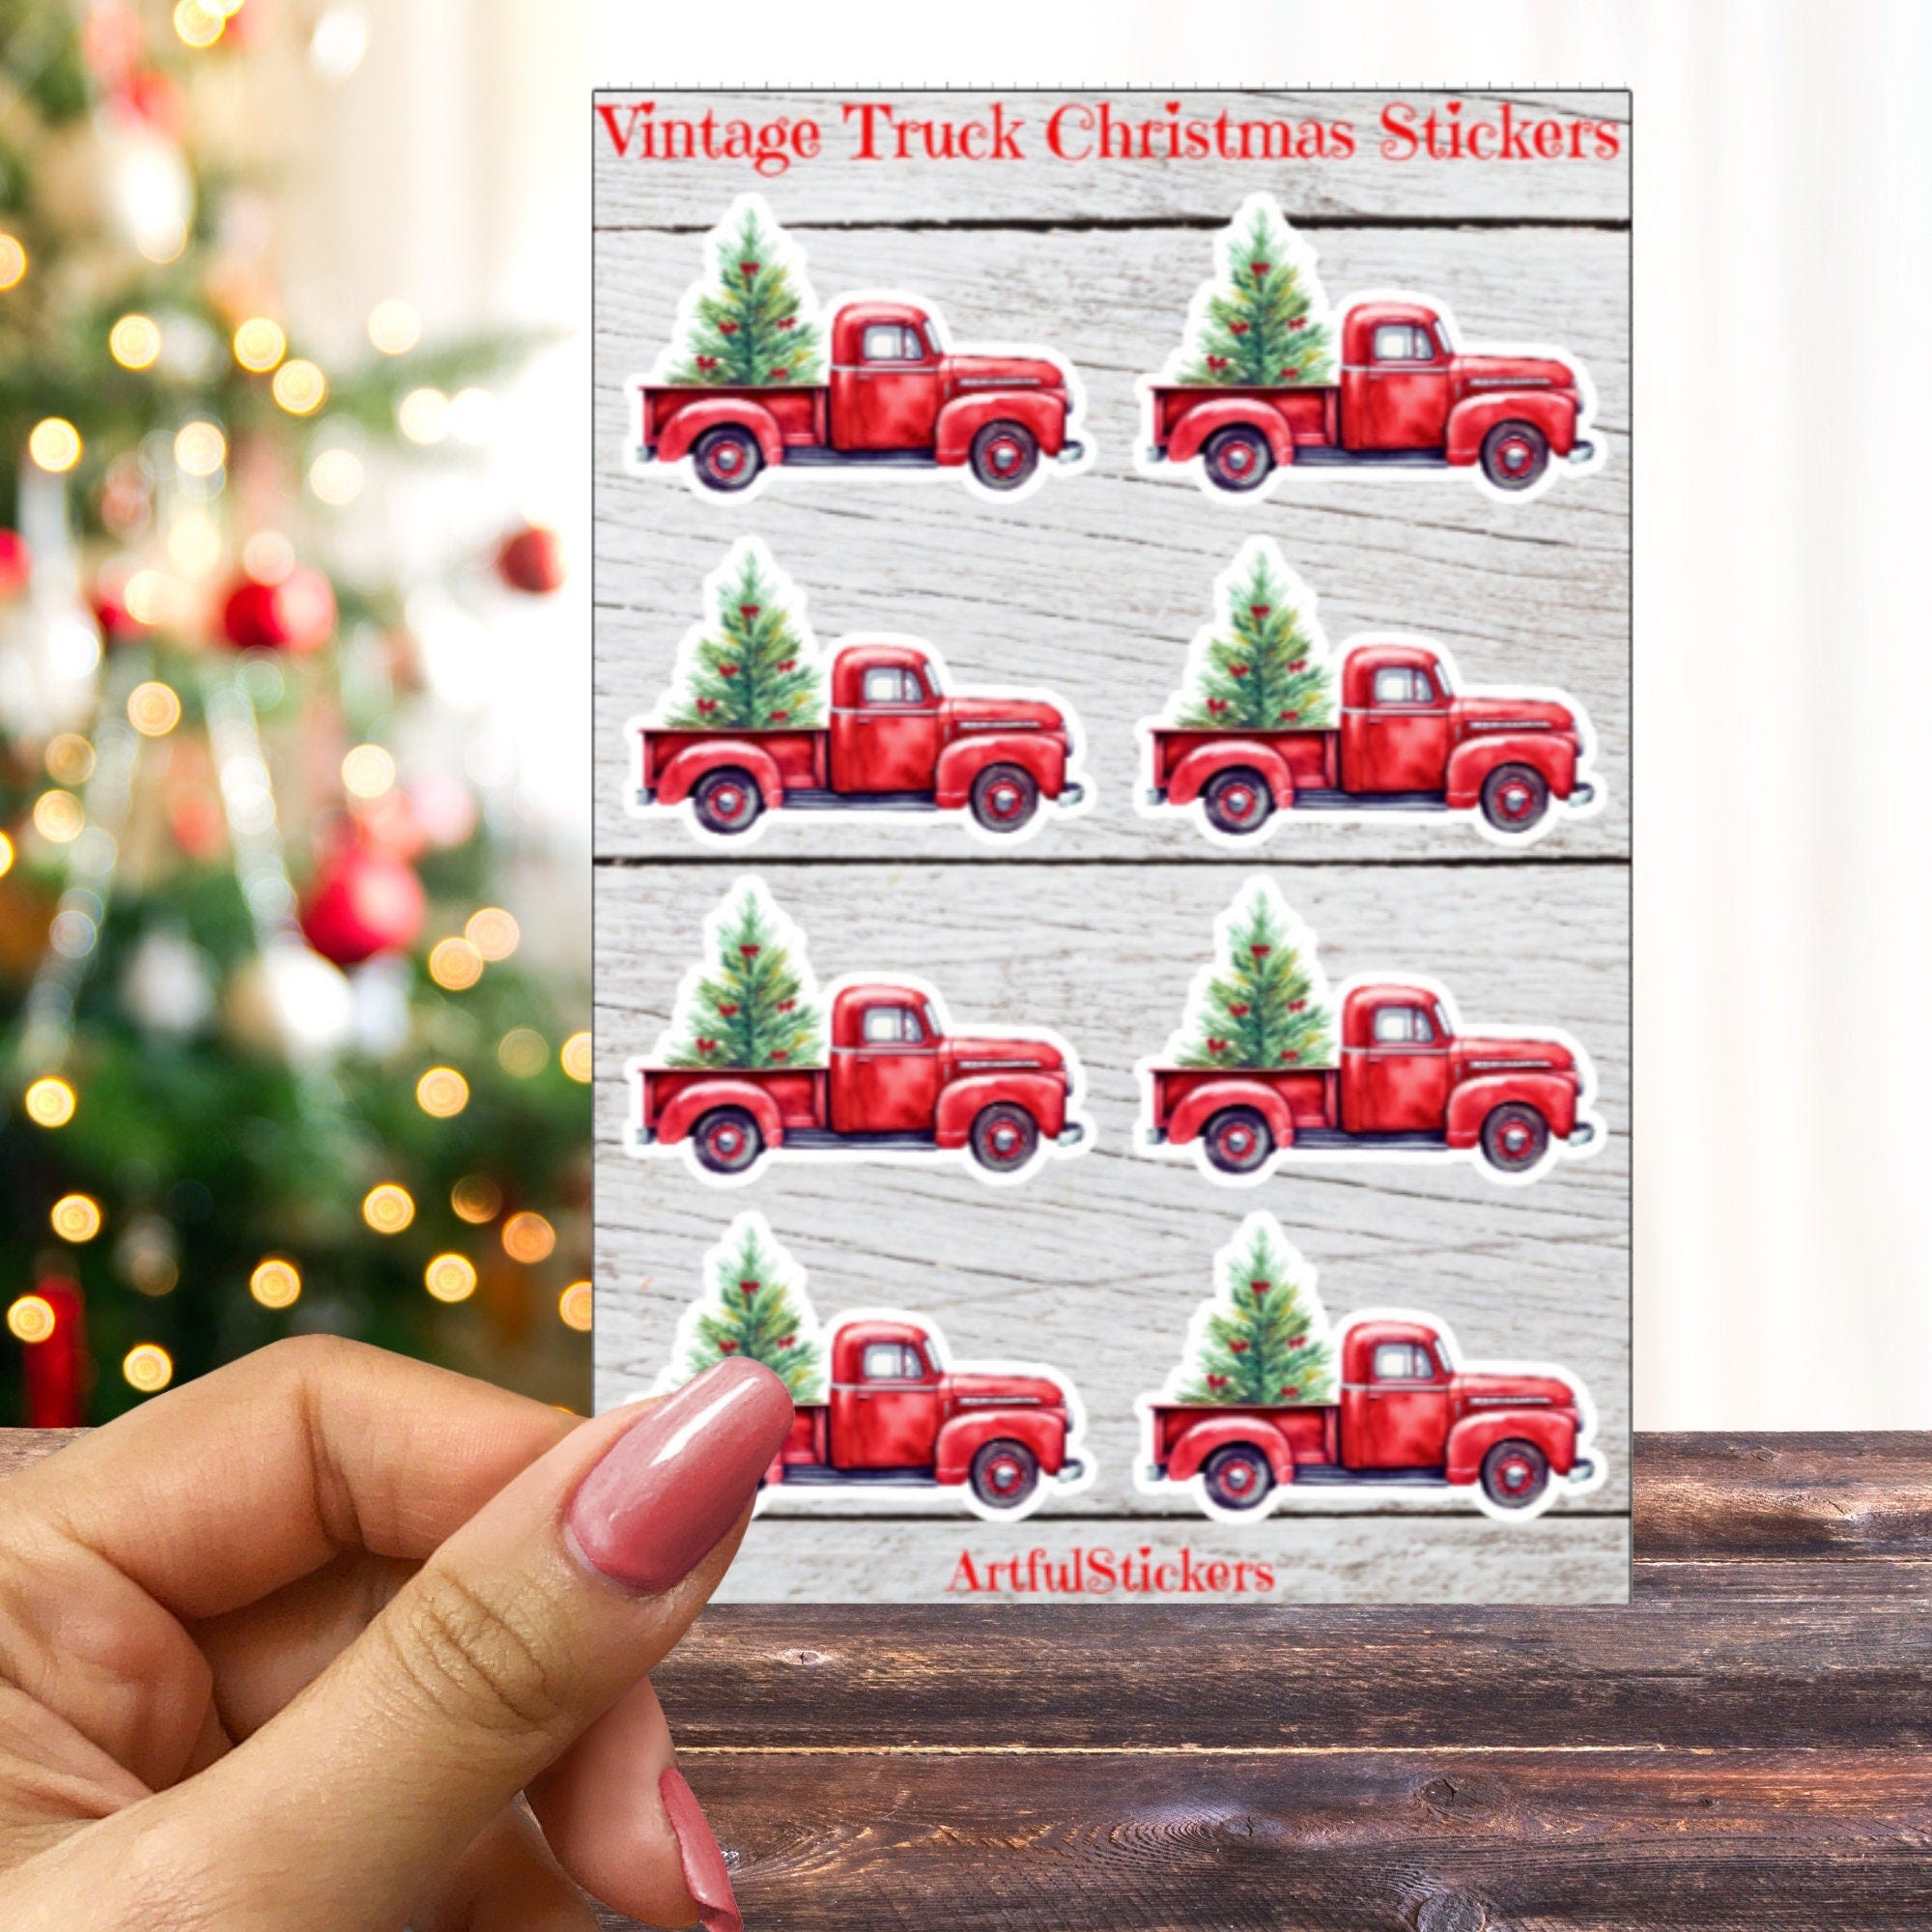 Old Red Truck Christmas Stickers - Sticker Pack of 8 Retro Trucks with Christmas Trees